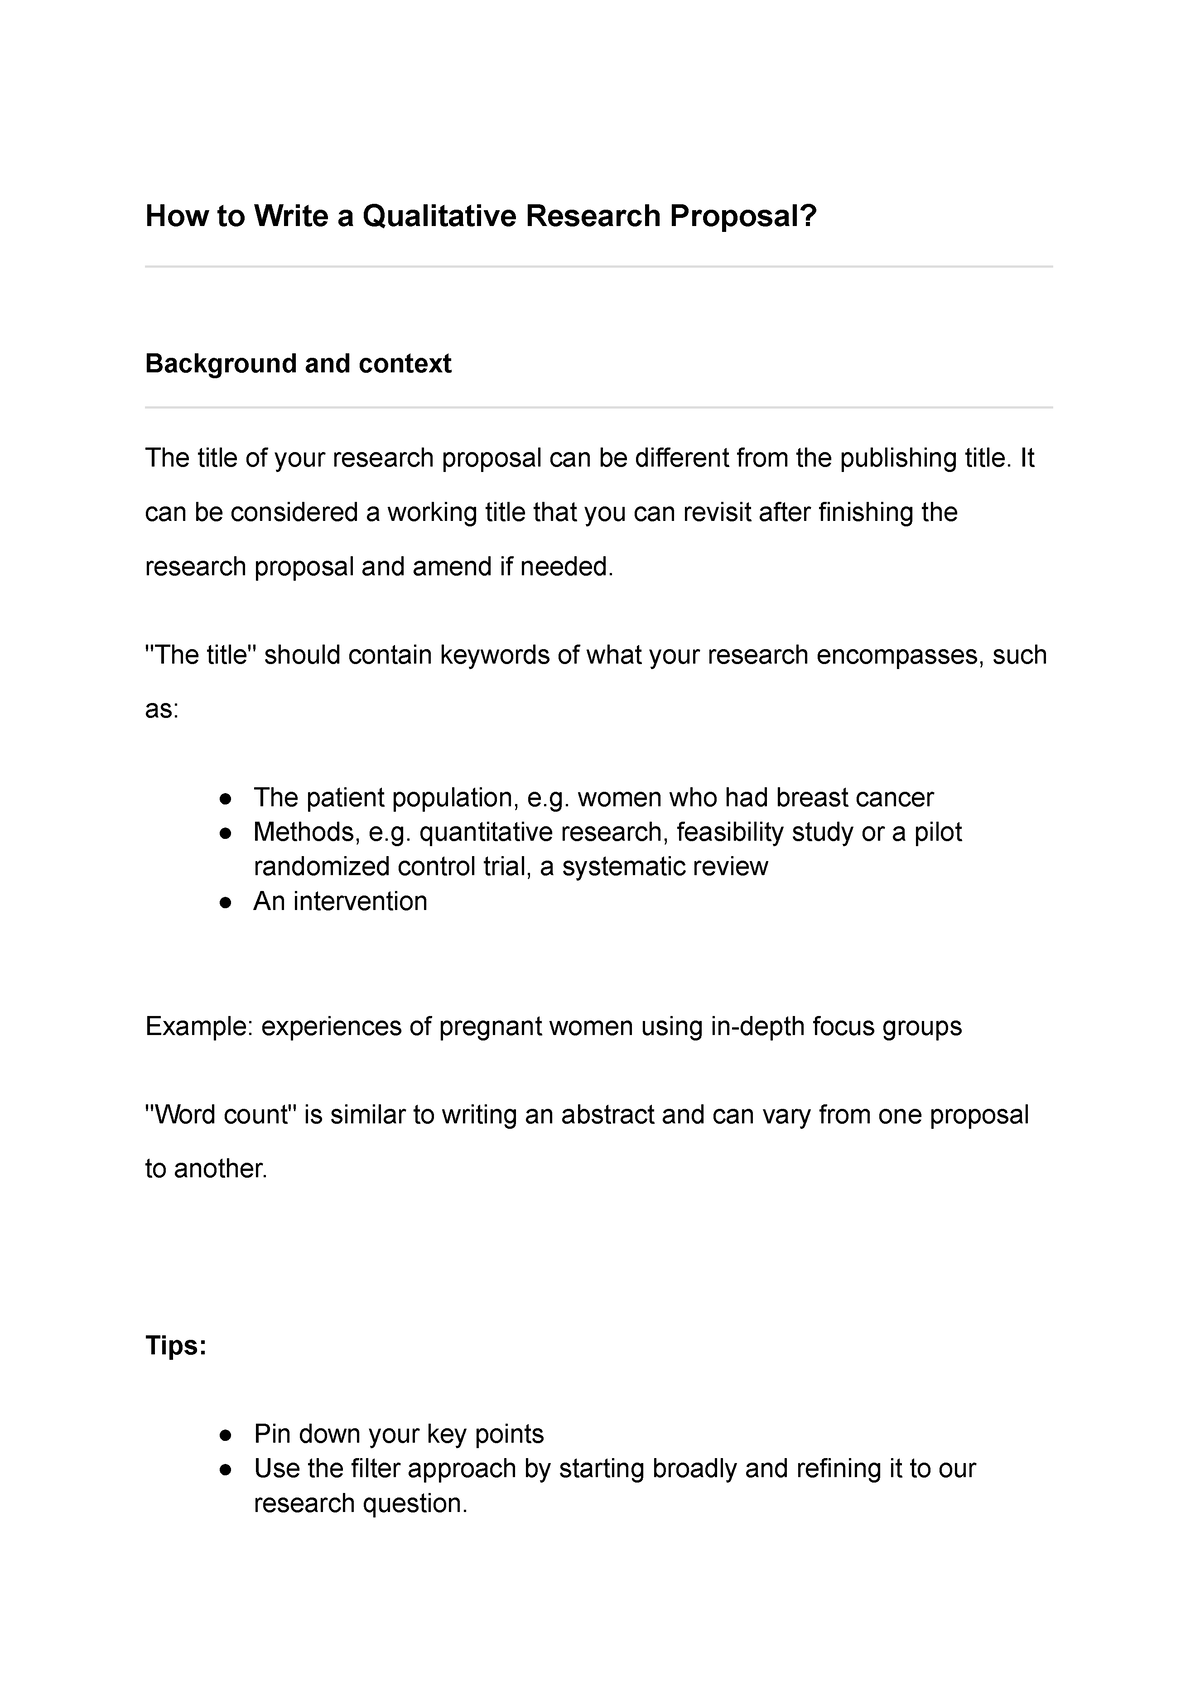 sample of a qualitative research proposal